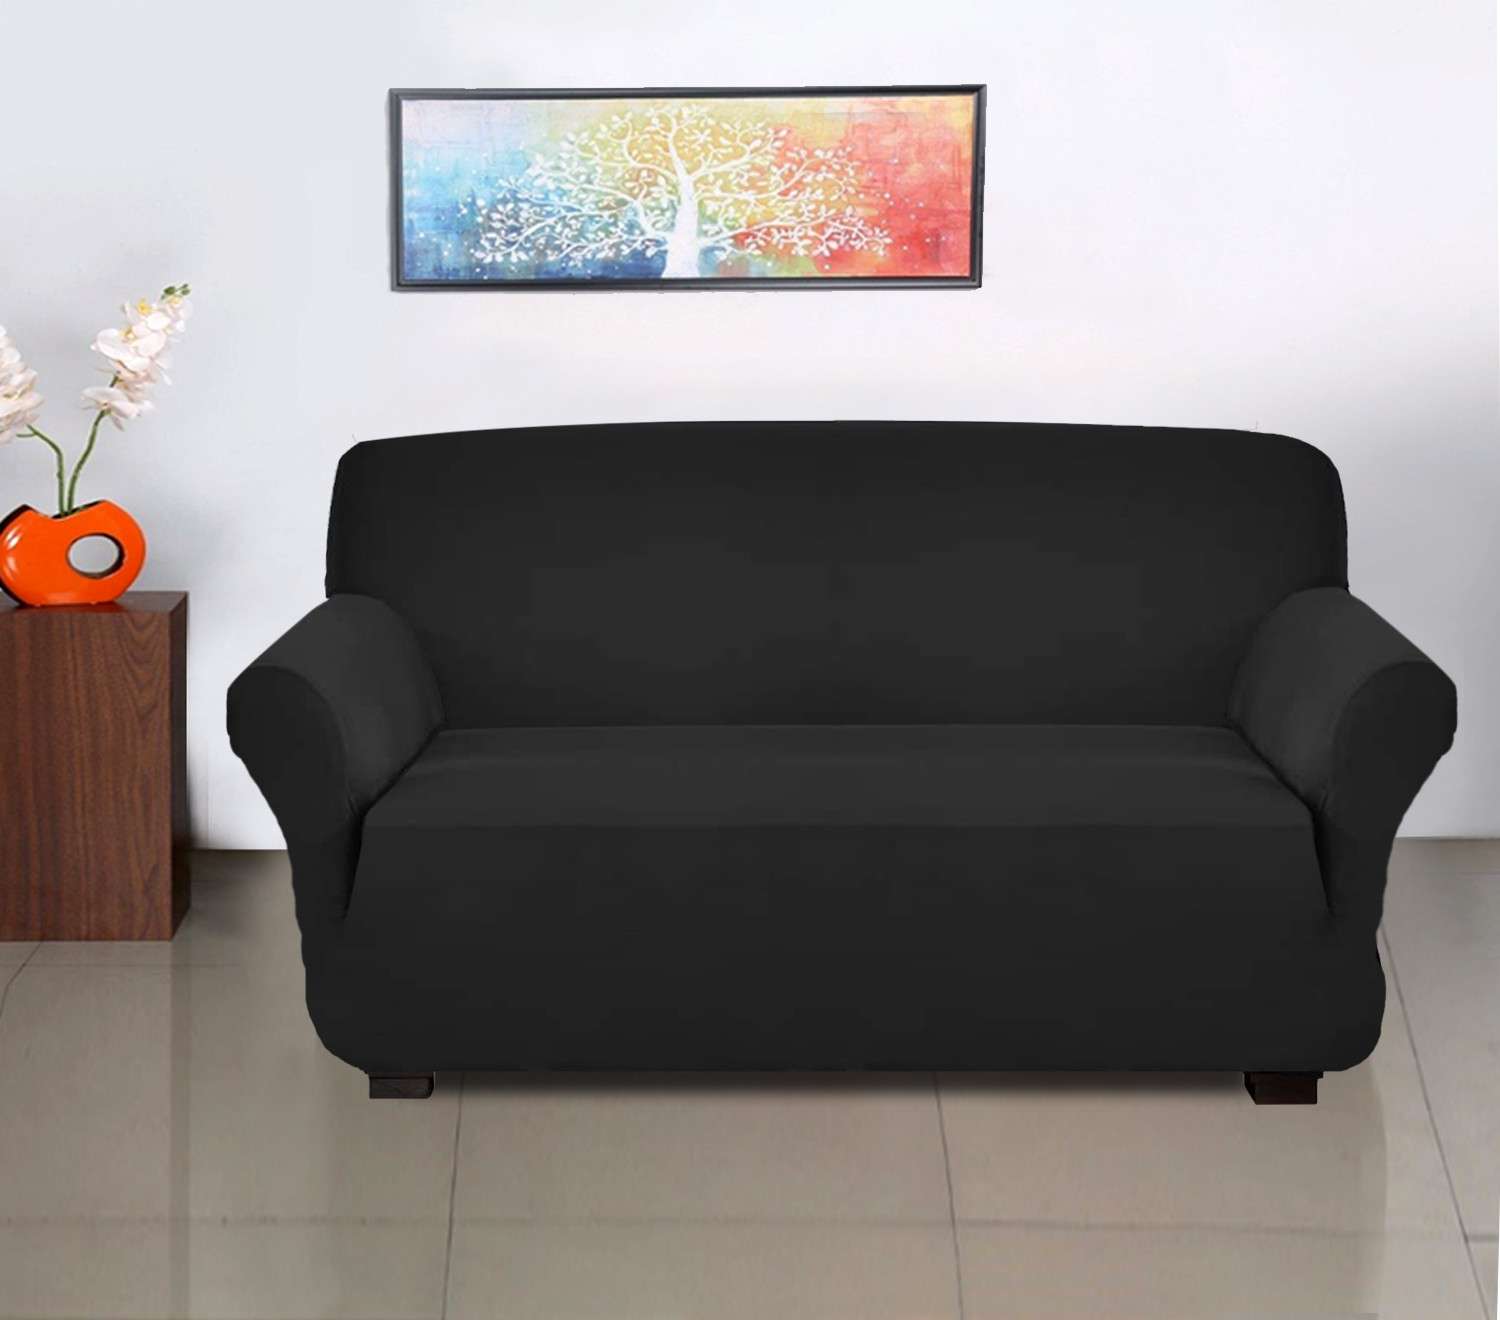 Kuber Industries Stretchable, Non-Slip Polyster 3 Seater Sofa Cover/Slipcover/Protector With Foam Stick (Black)